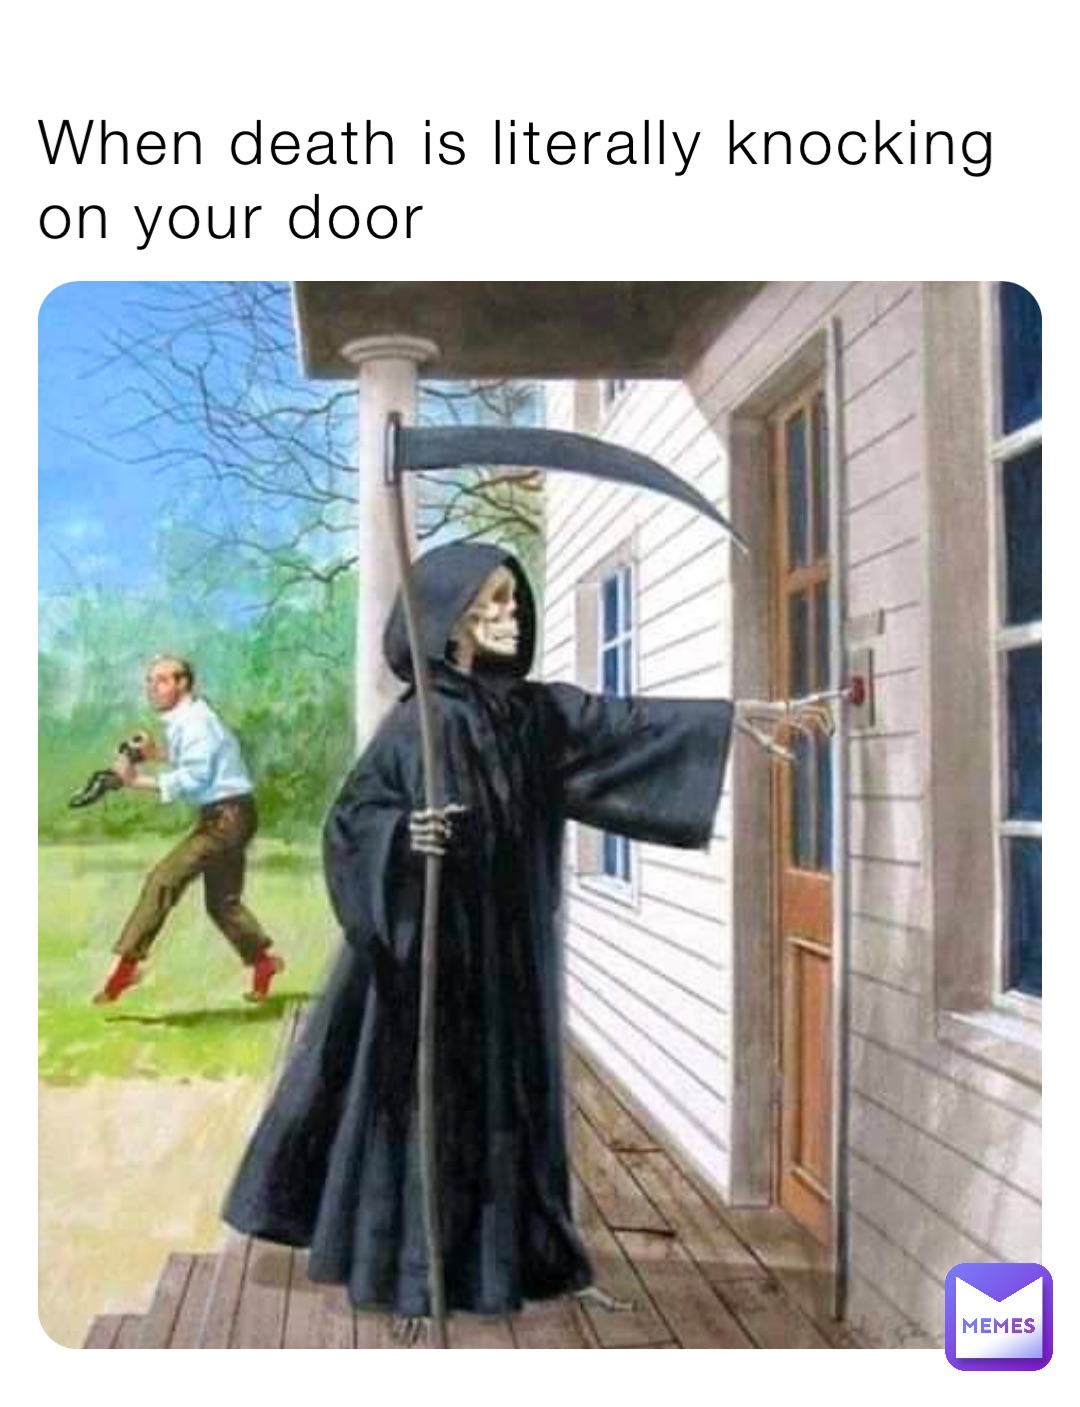 When death is literally knocking on your door